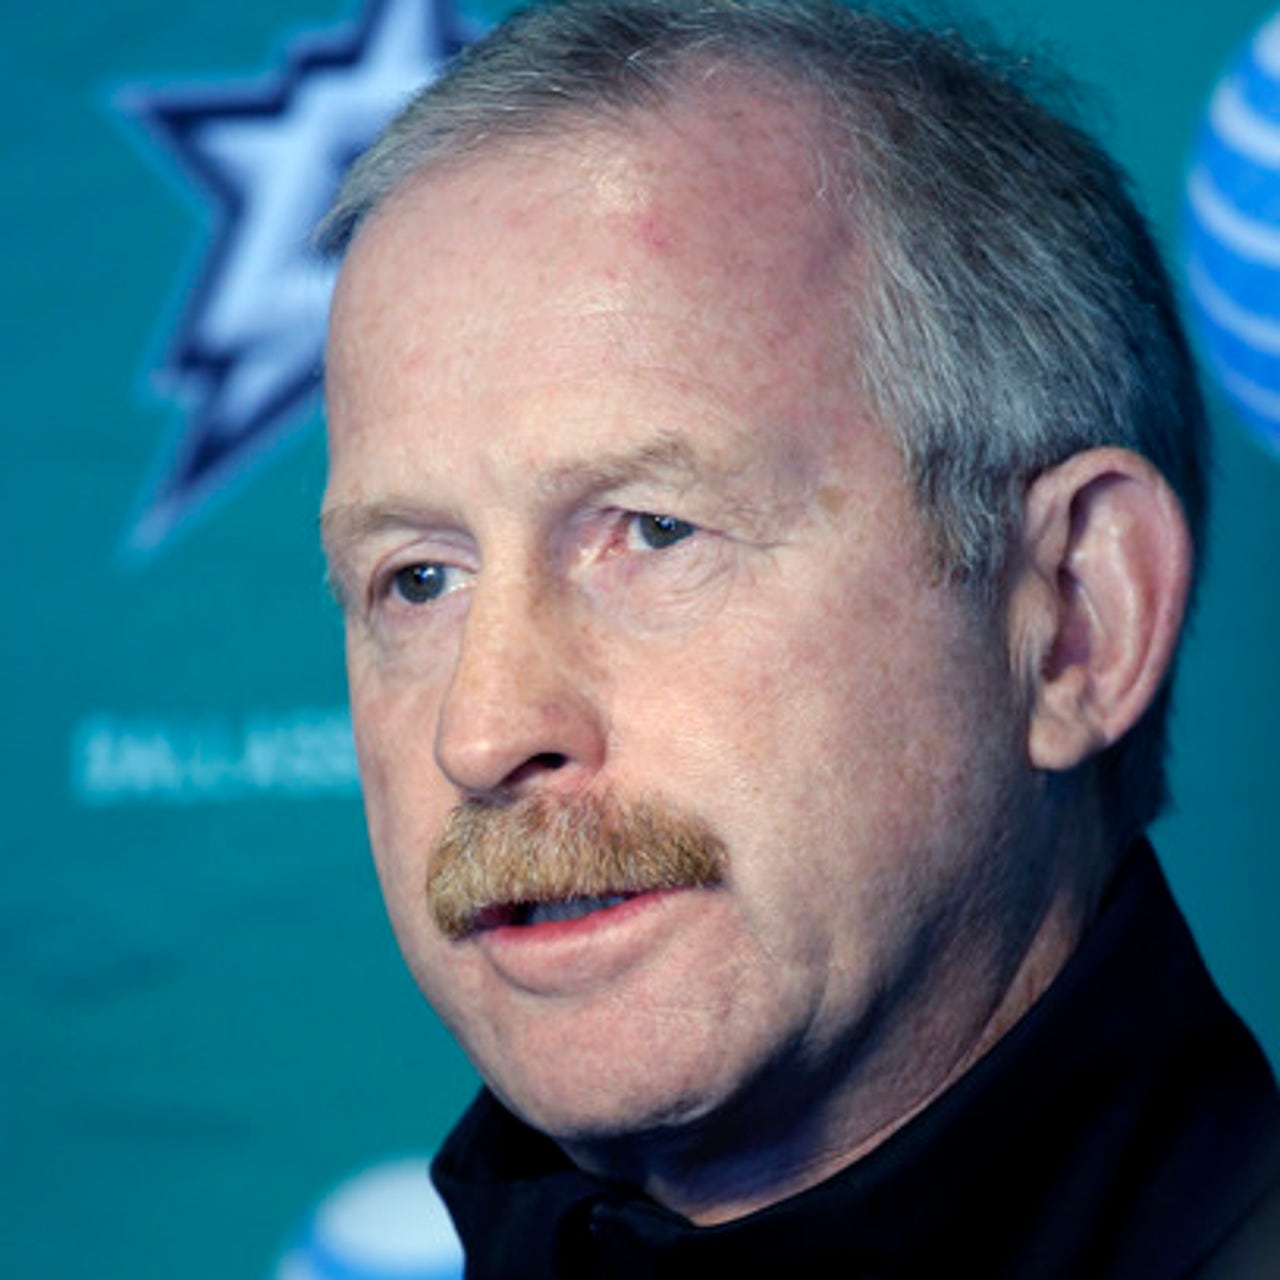 Dallas Stars sign GM Jim Nill to contract extension